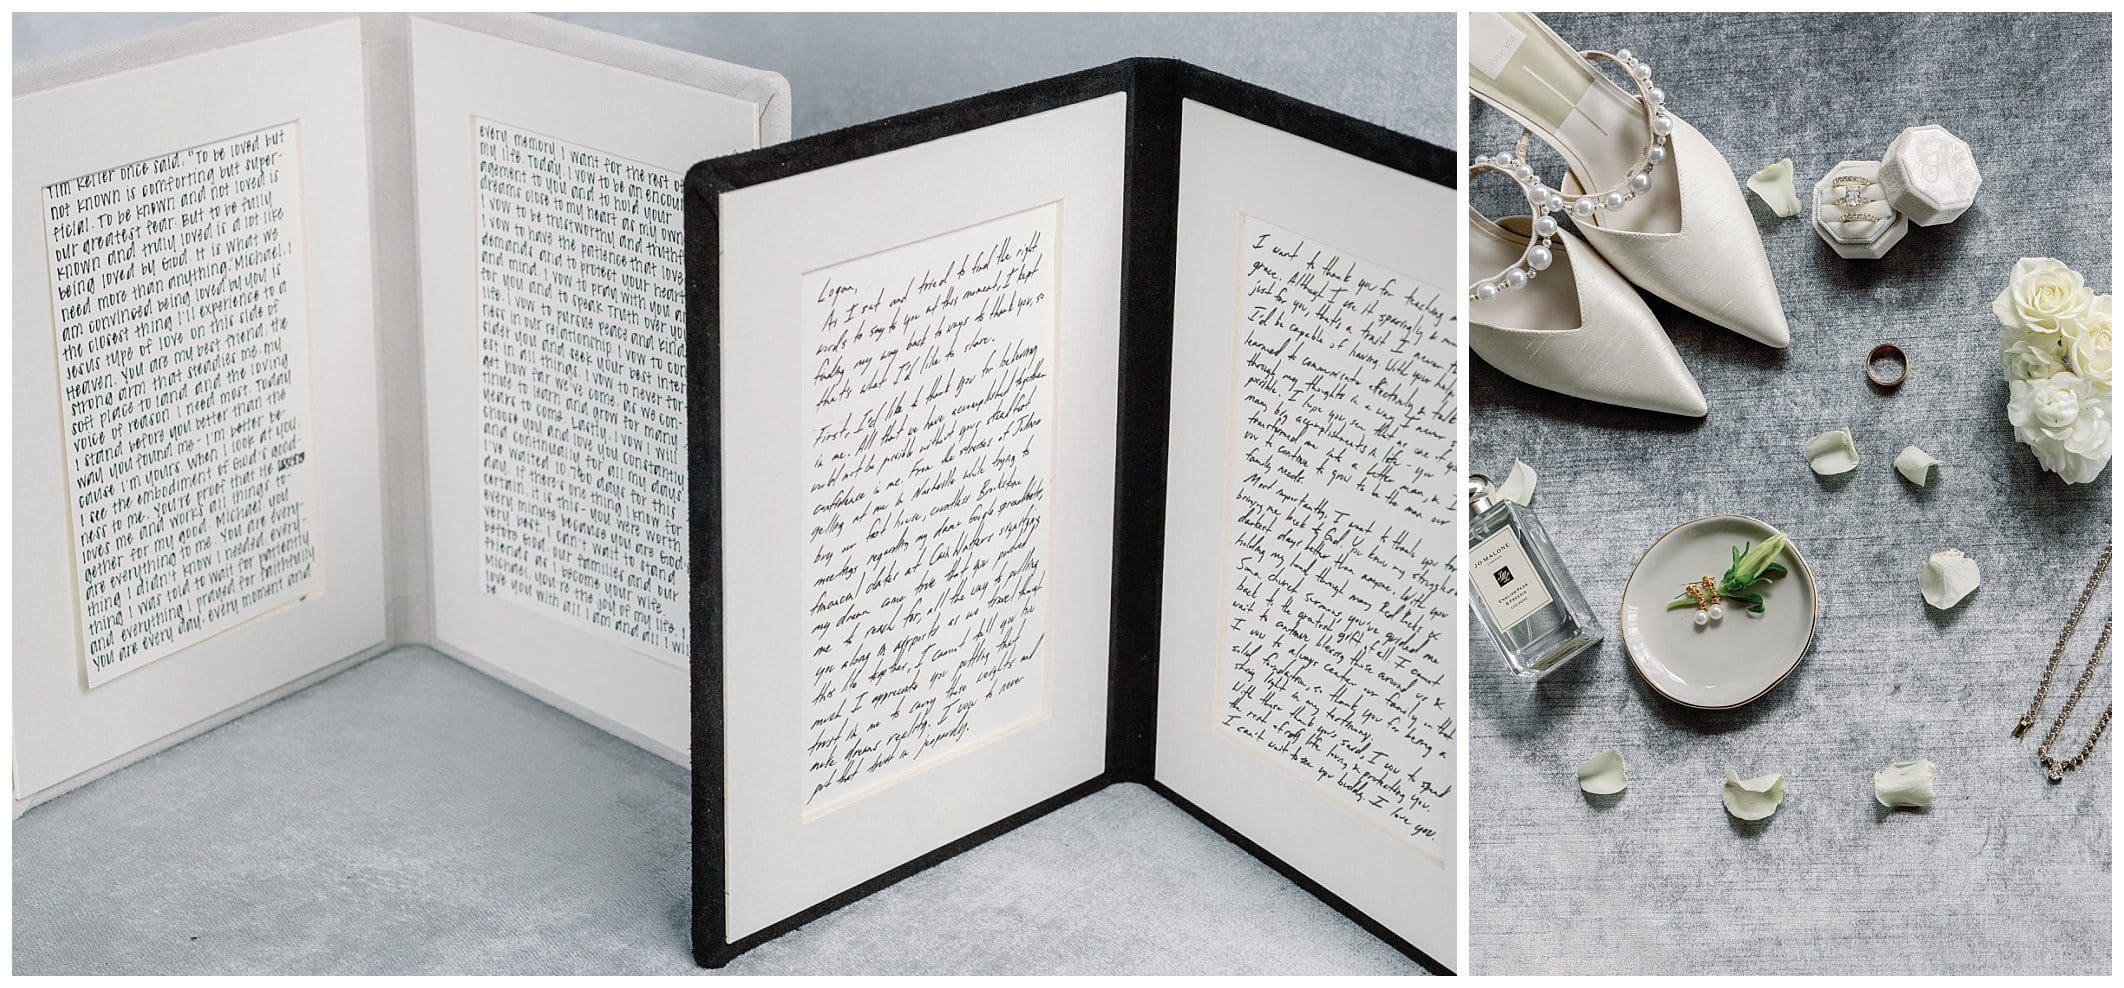 Left: open book with handwritten wedding vows. middle: close-up of open book with hand written vows. right: wedding accessories including shoes, rings, and flowers on a table.